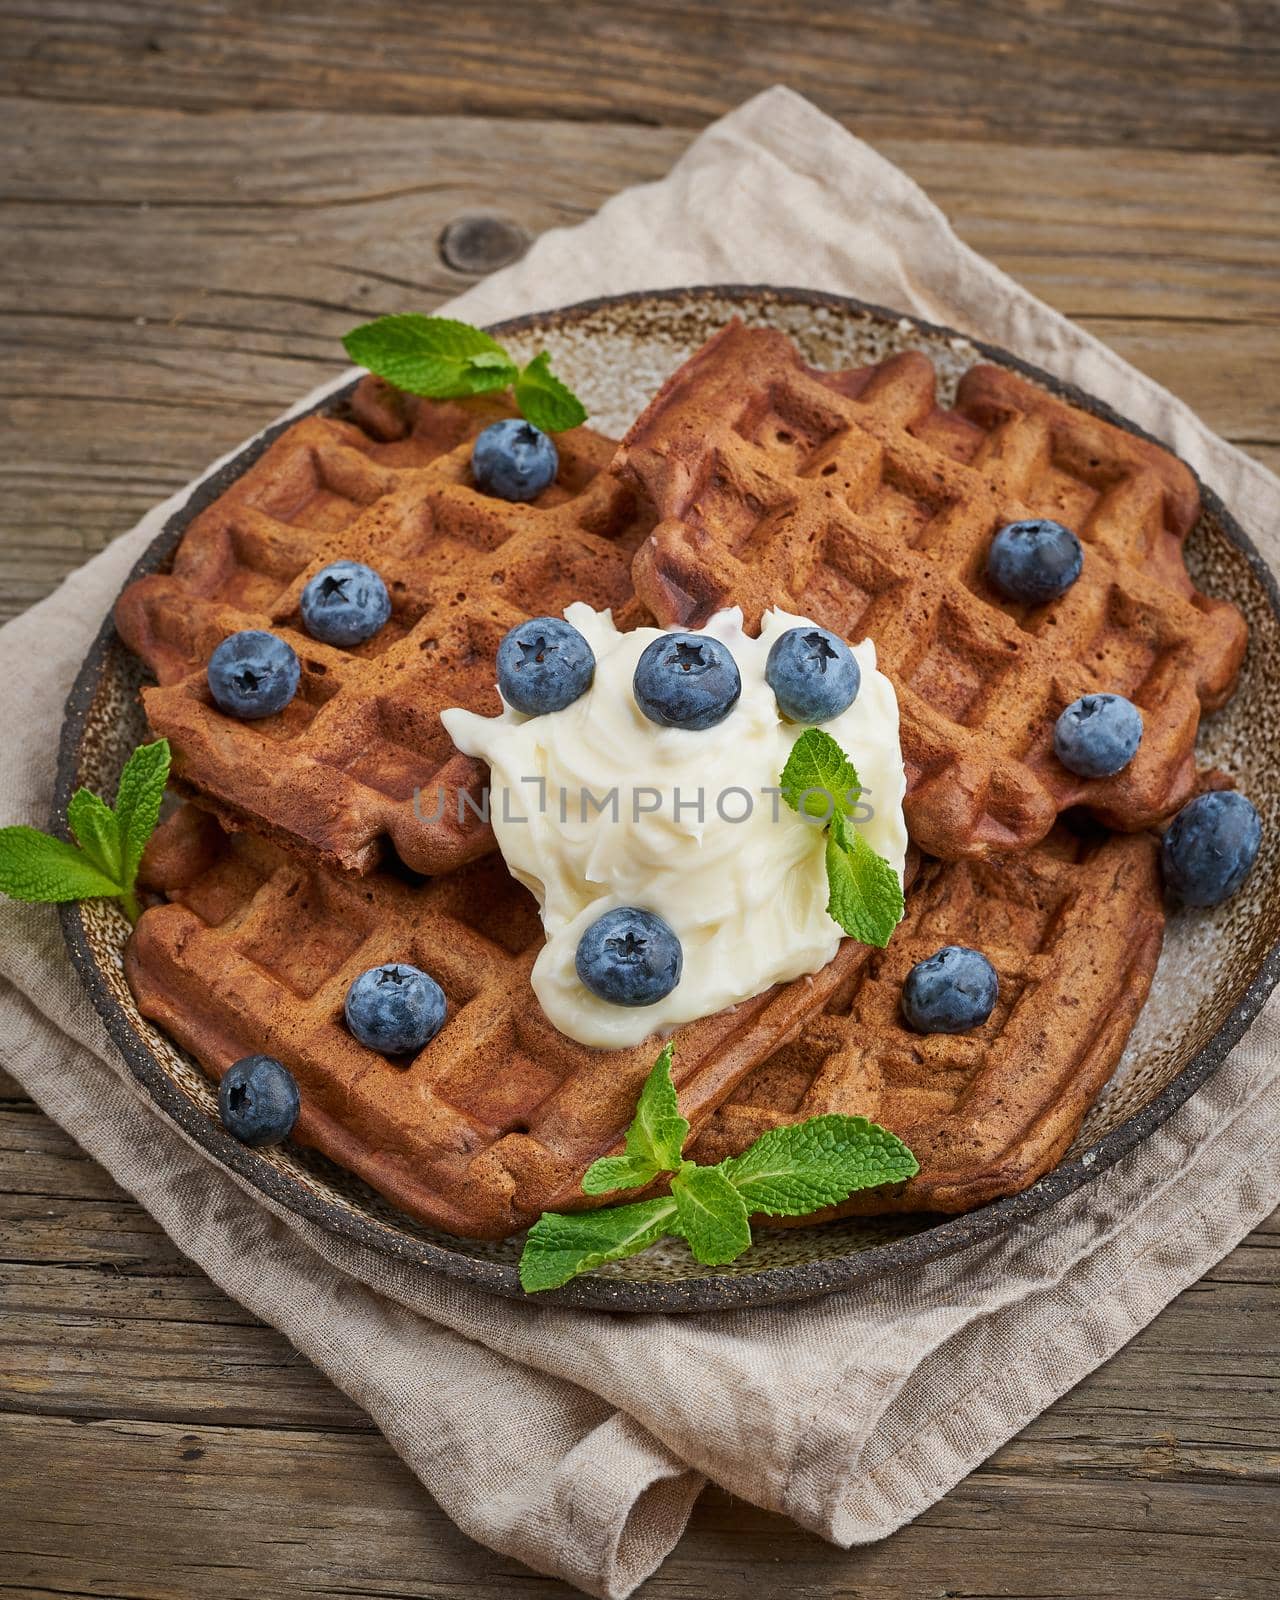 Chocolate banana waffles with blueberries, on dark wooden old table. Side view, vertical by NataBene